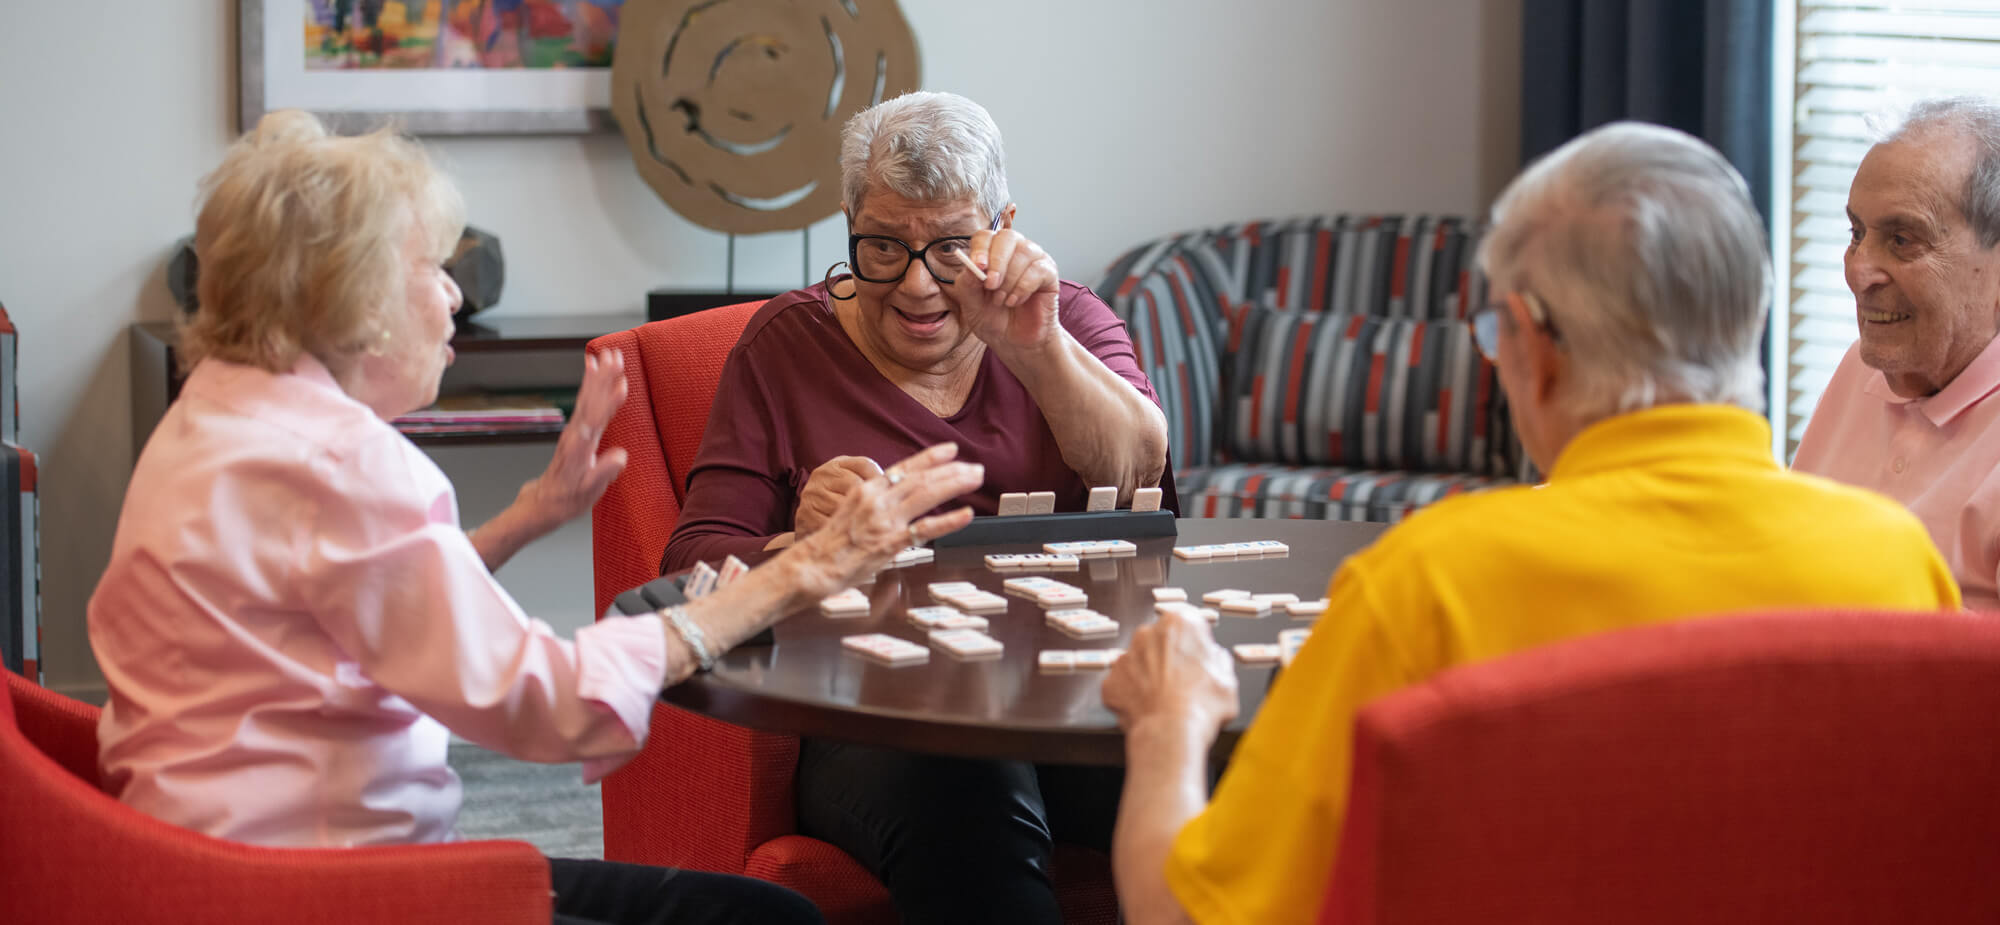 residents enjoying our recreational facilities